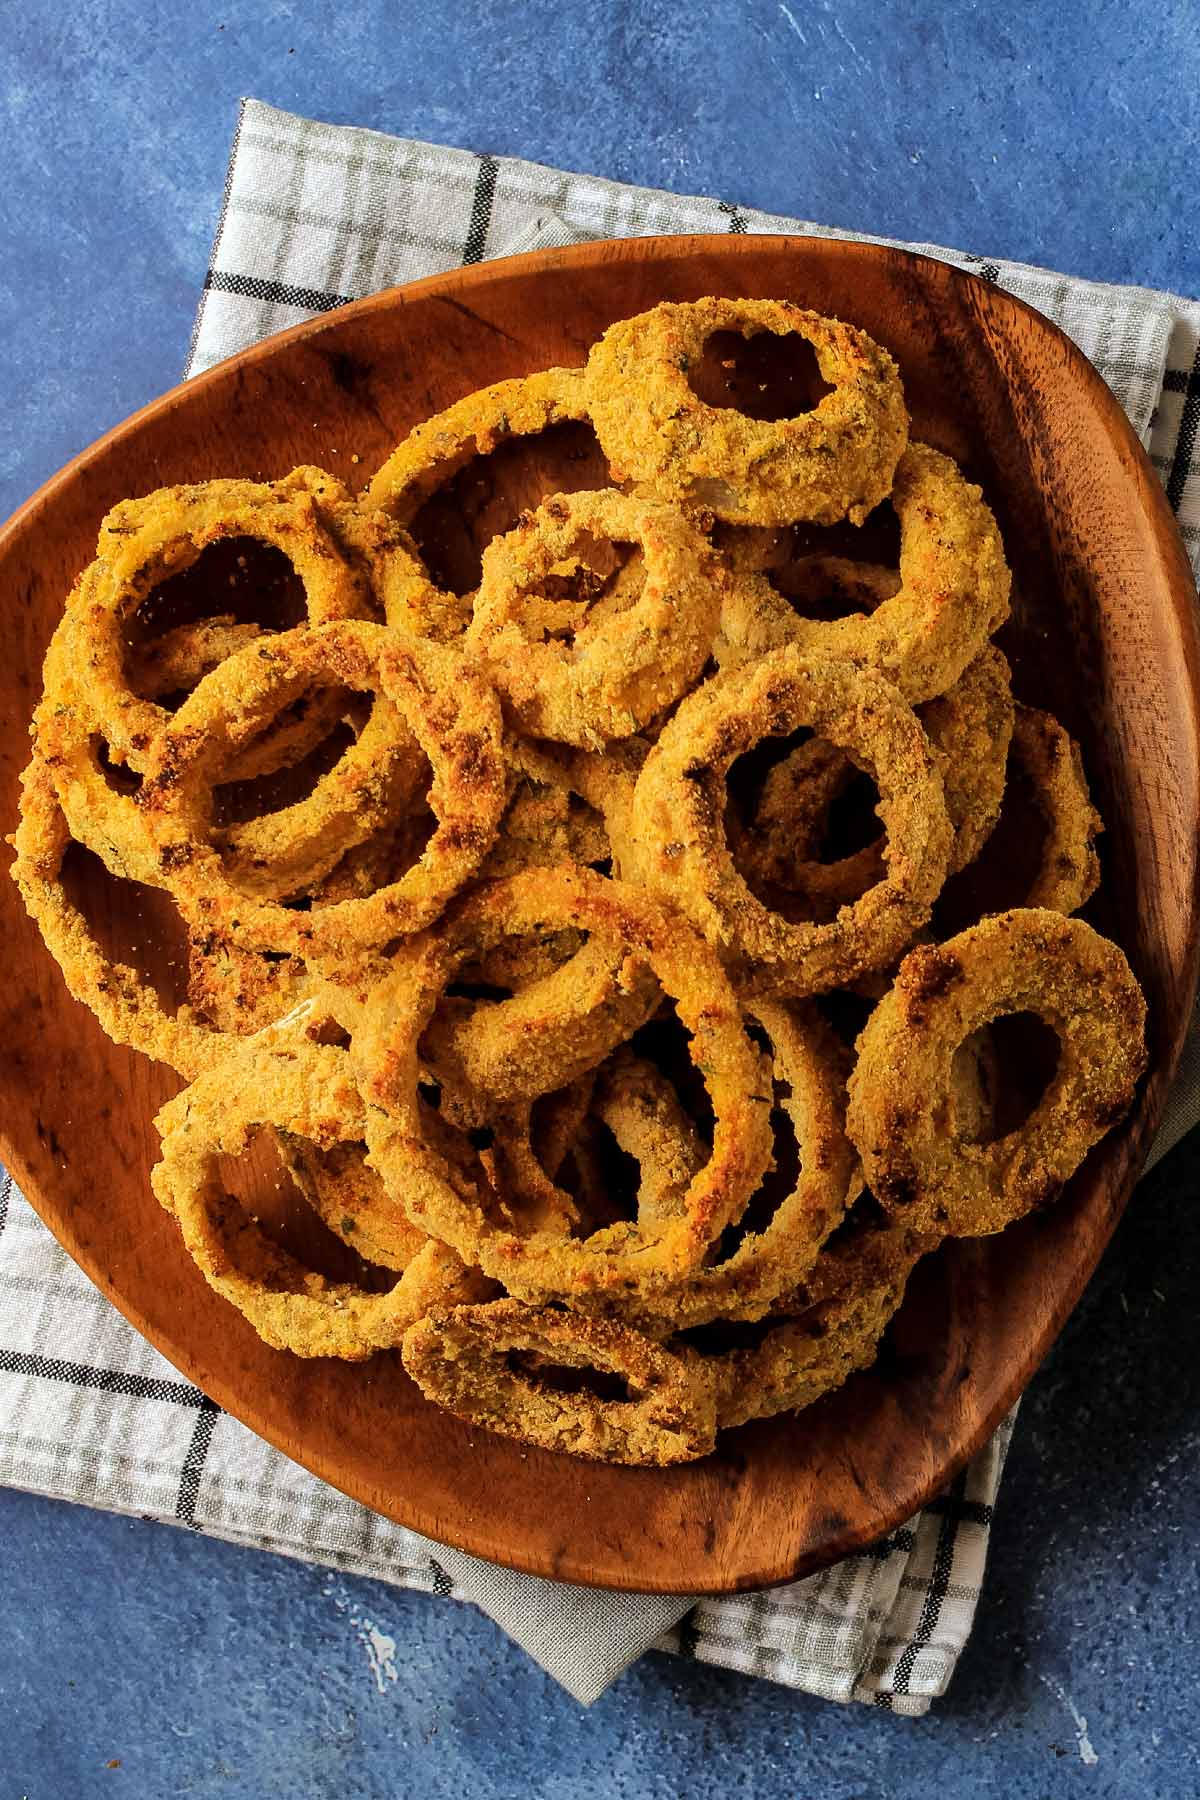 Platter of onion rings on plate with a hand reaching to grab one.